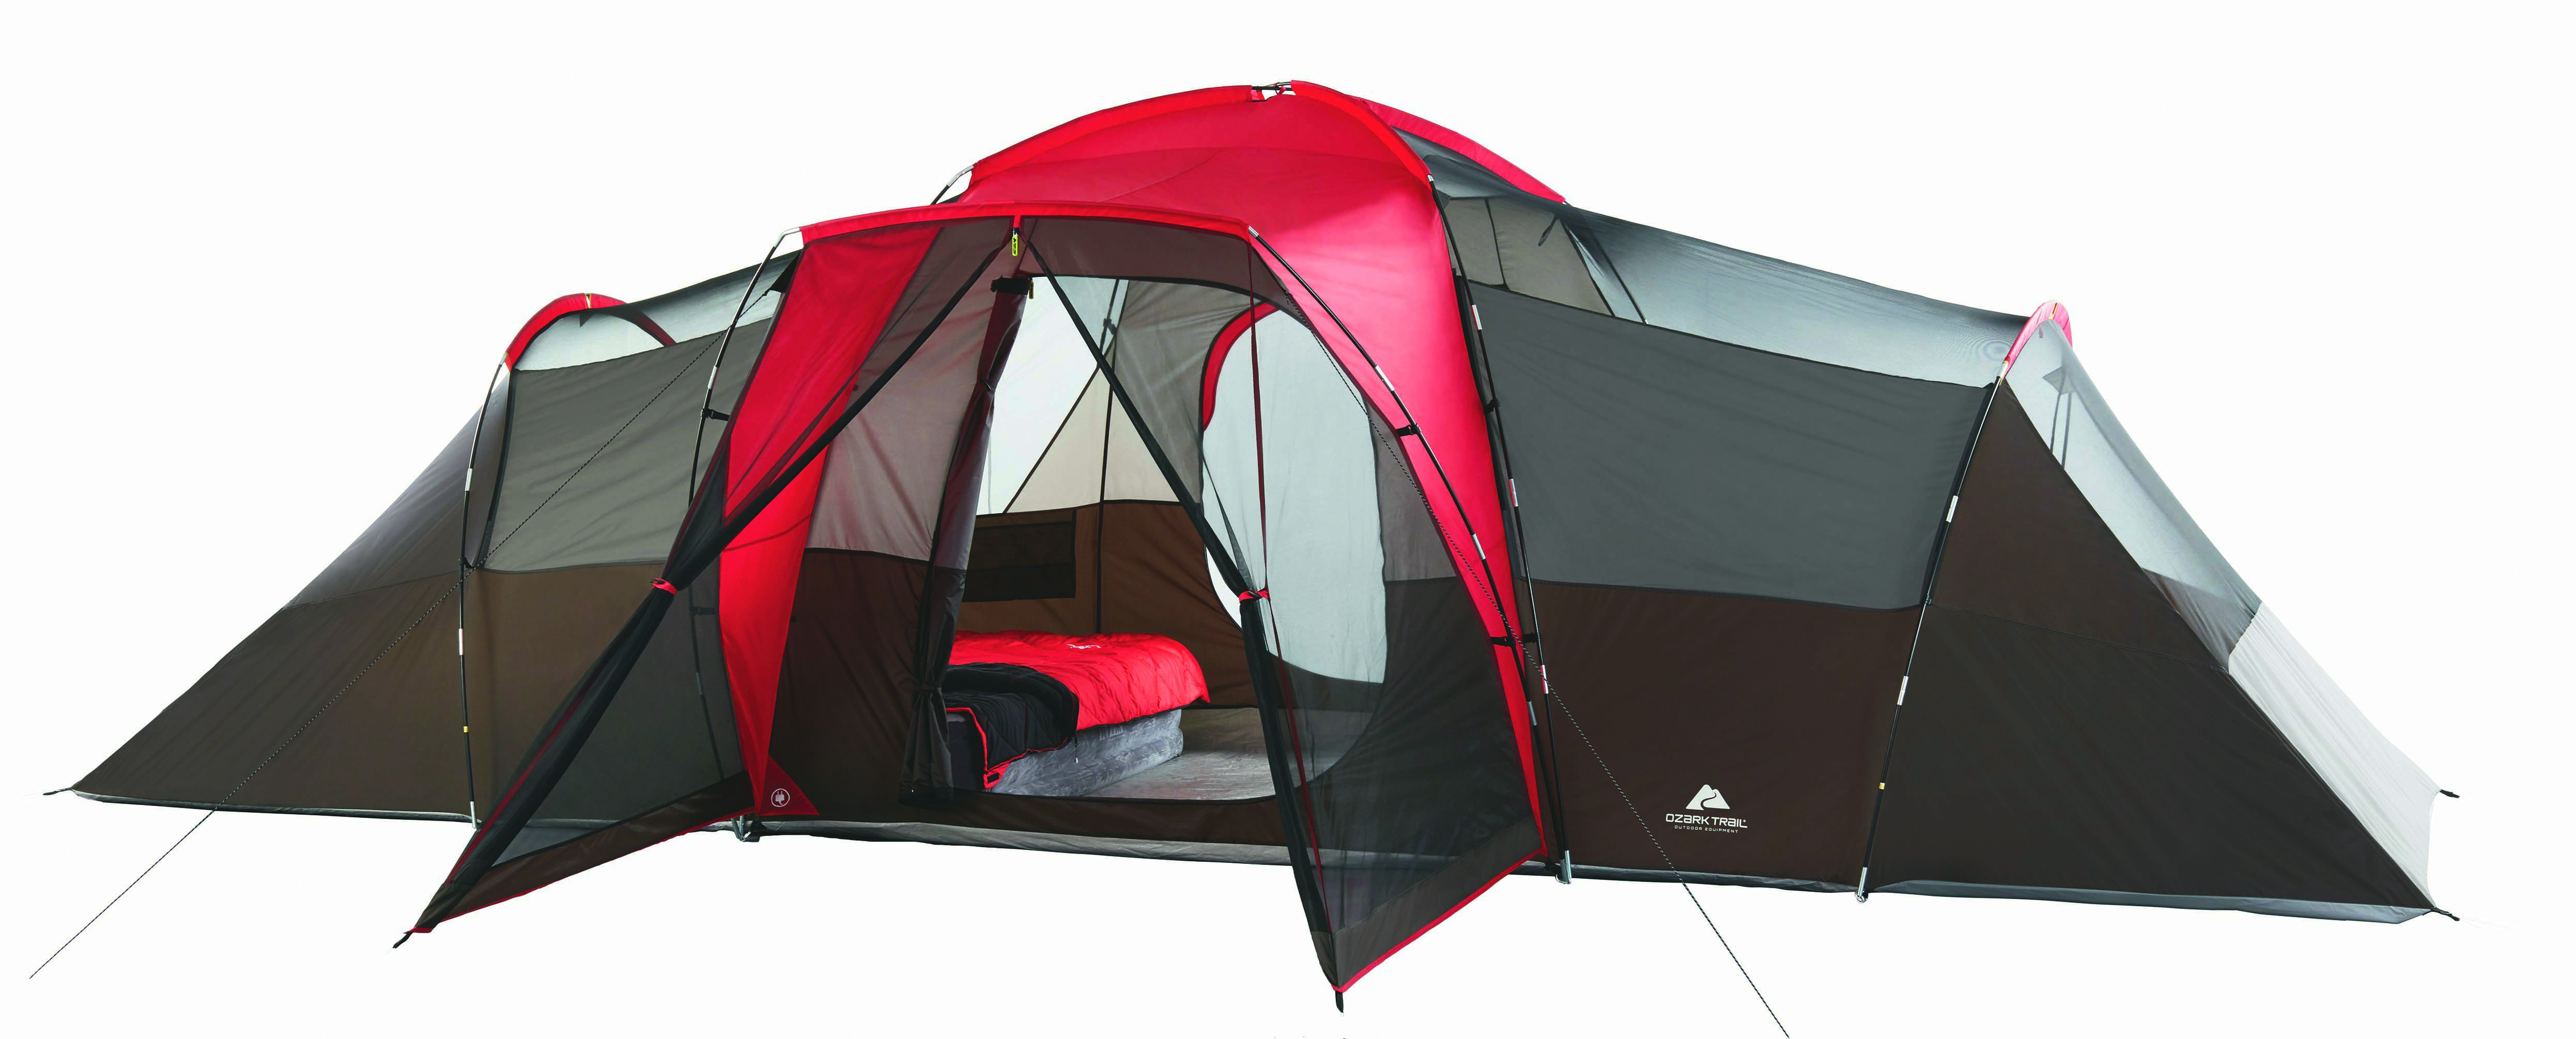 Ozark Trail, 21' x 15’ x 78” 10-Person Family Camping Tent - image 3 of 11